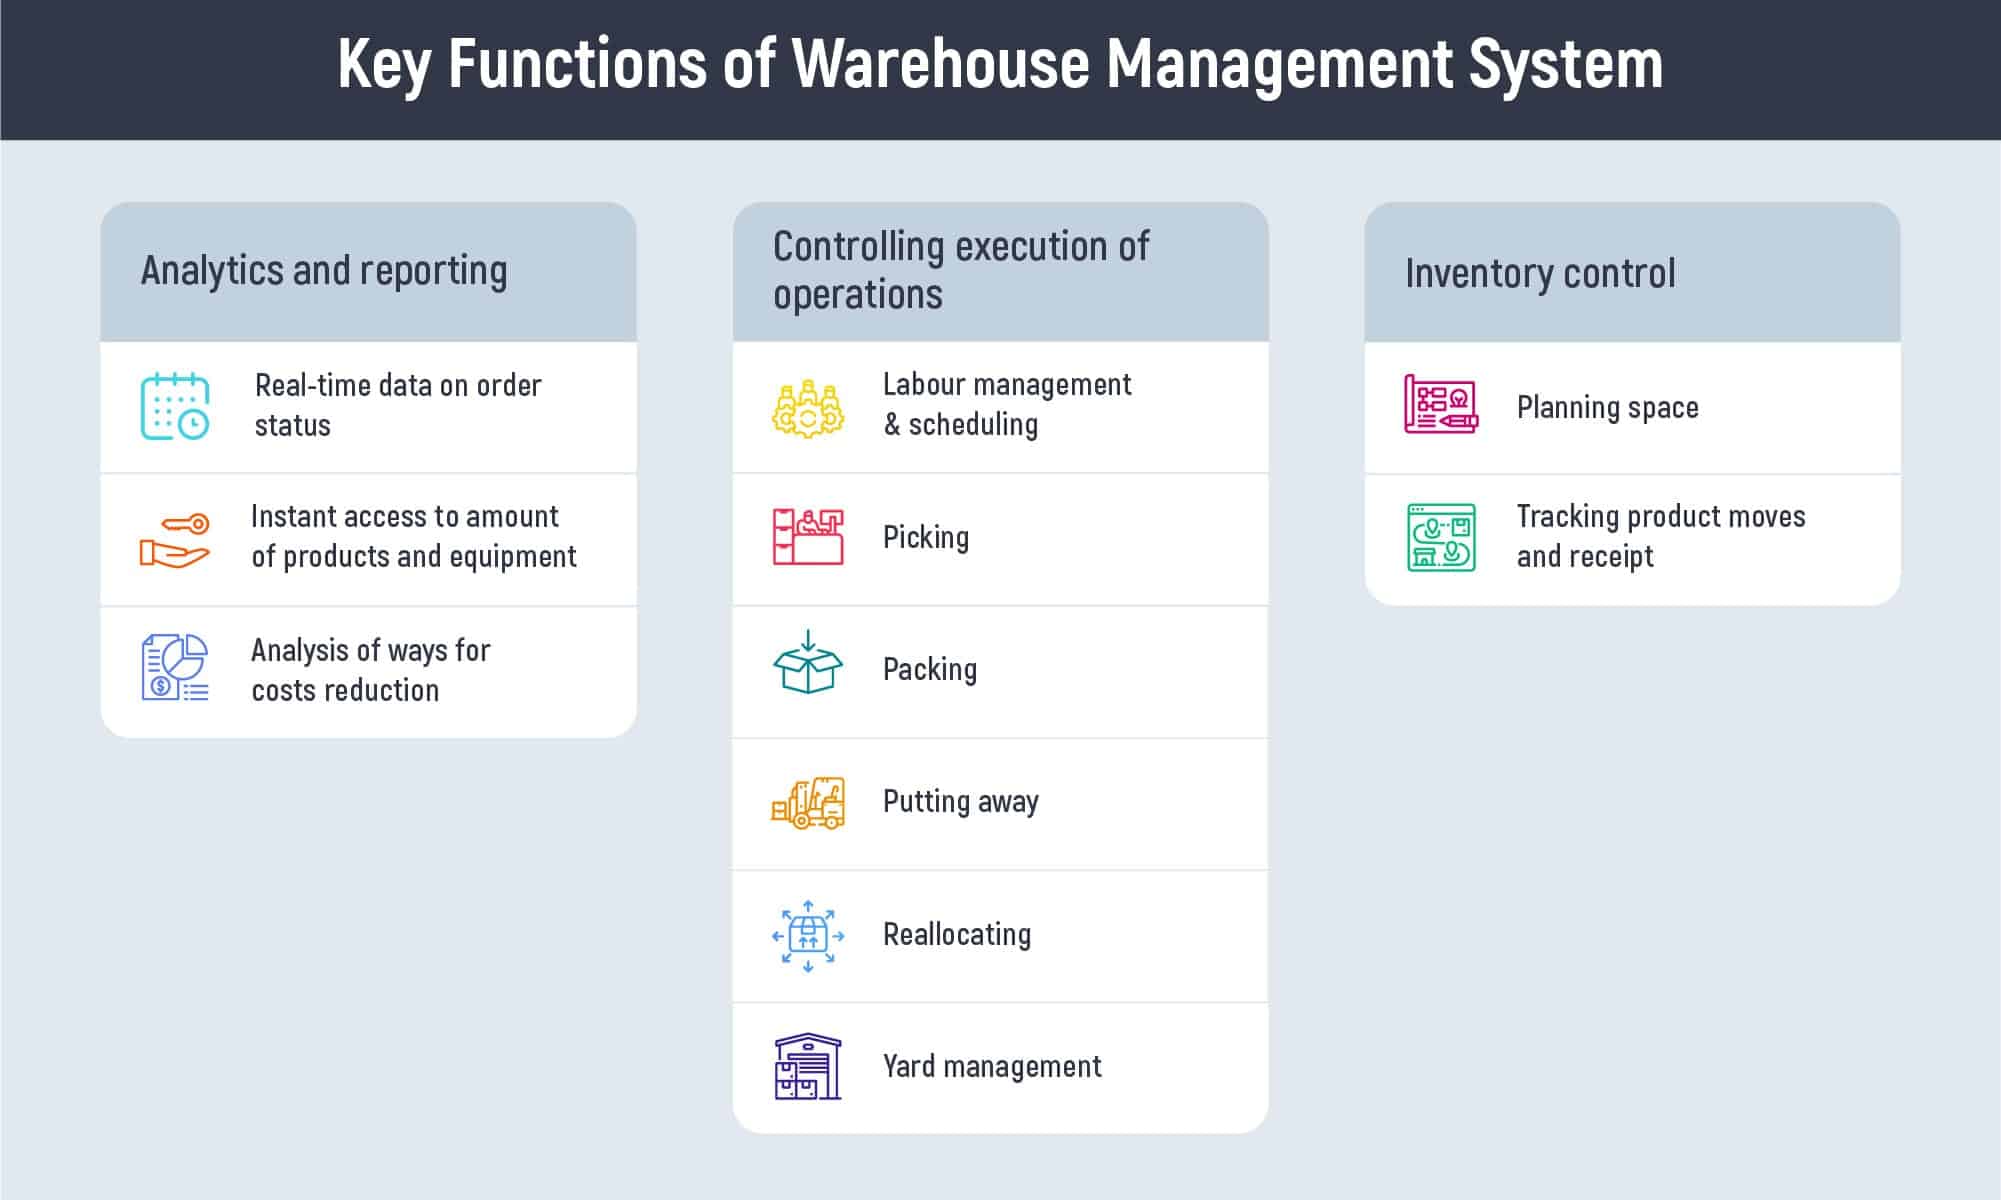 Key functions of warehouse management system